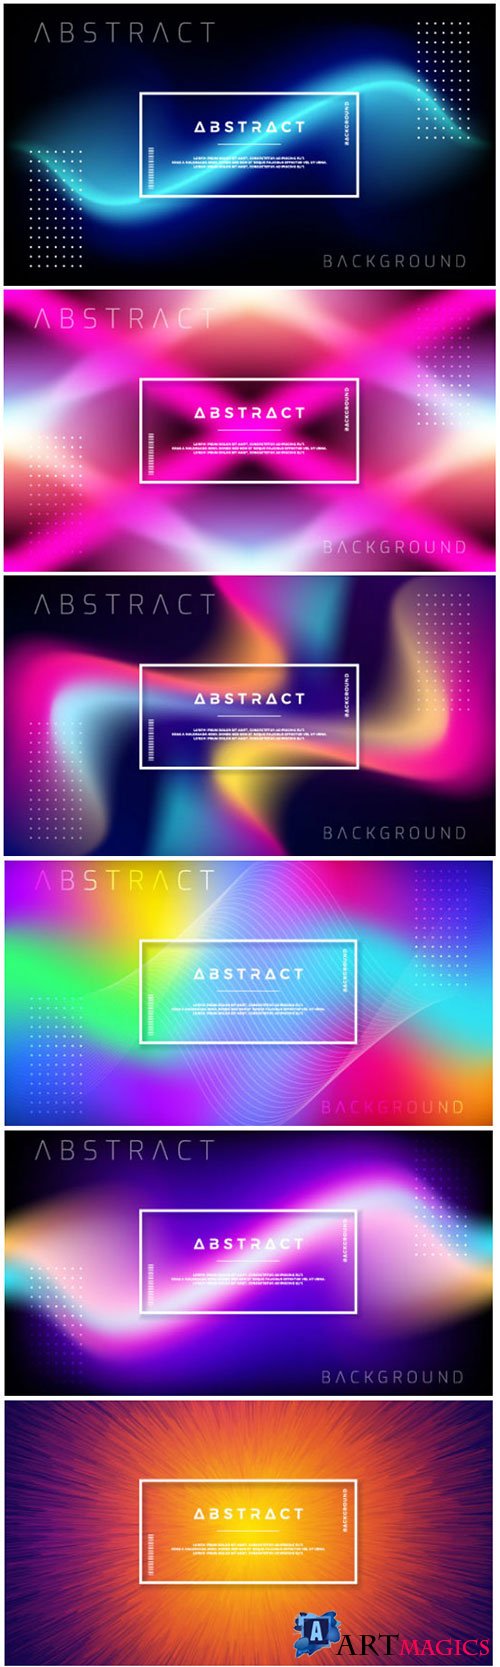 Abstract dynamic background design with colorful gradient shapes